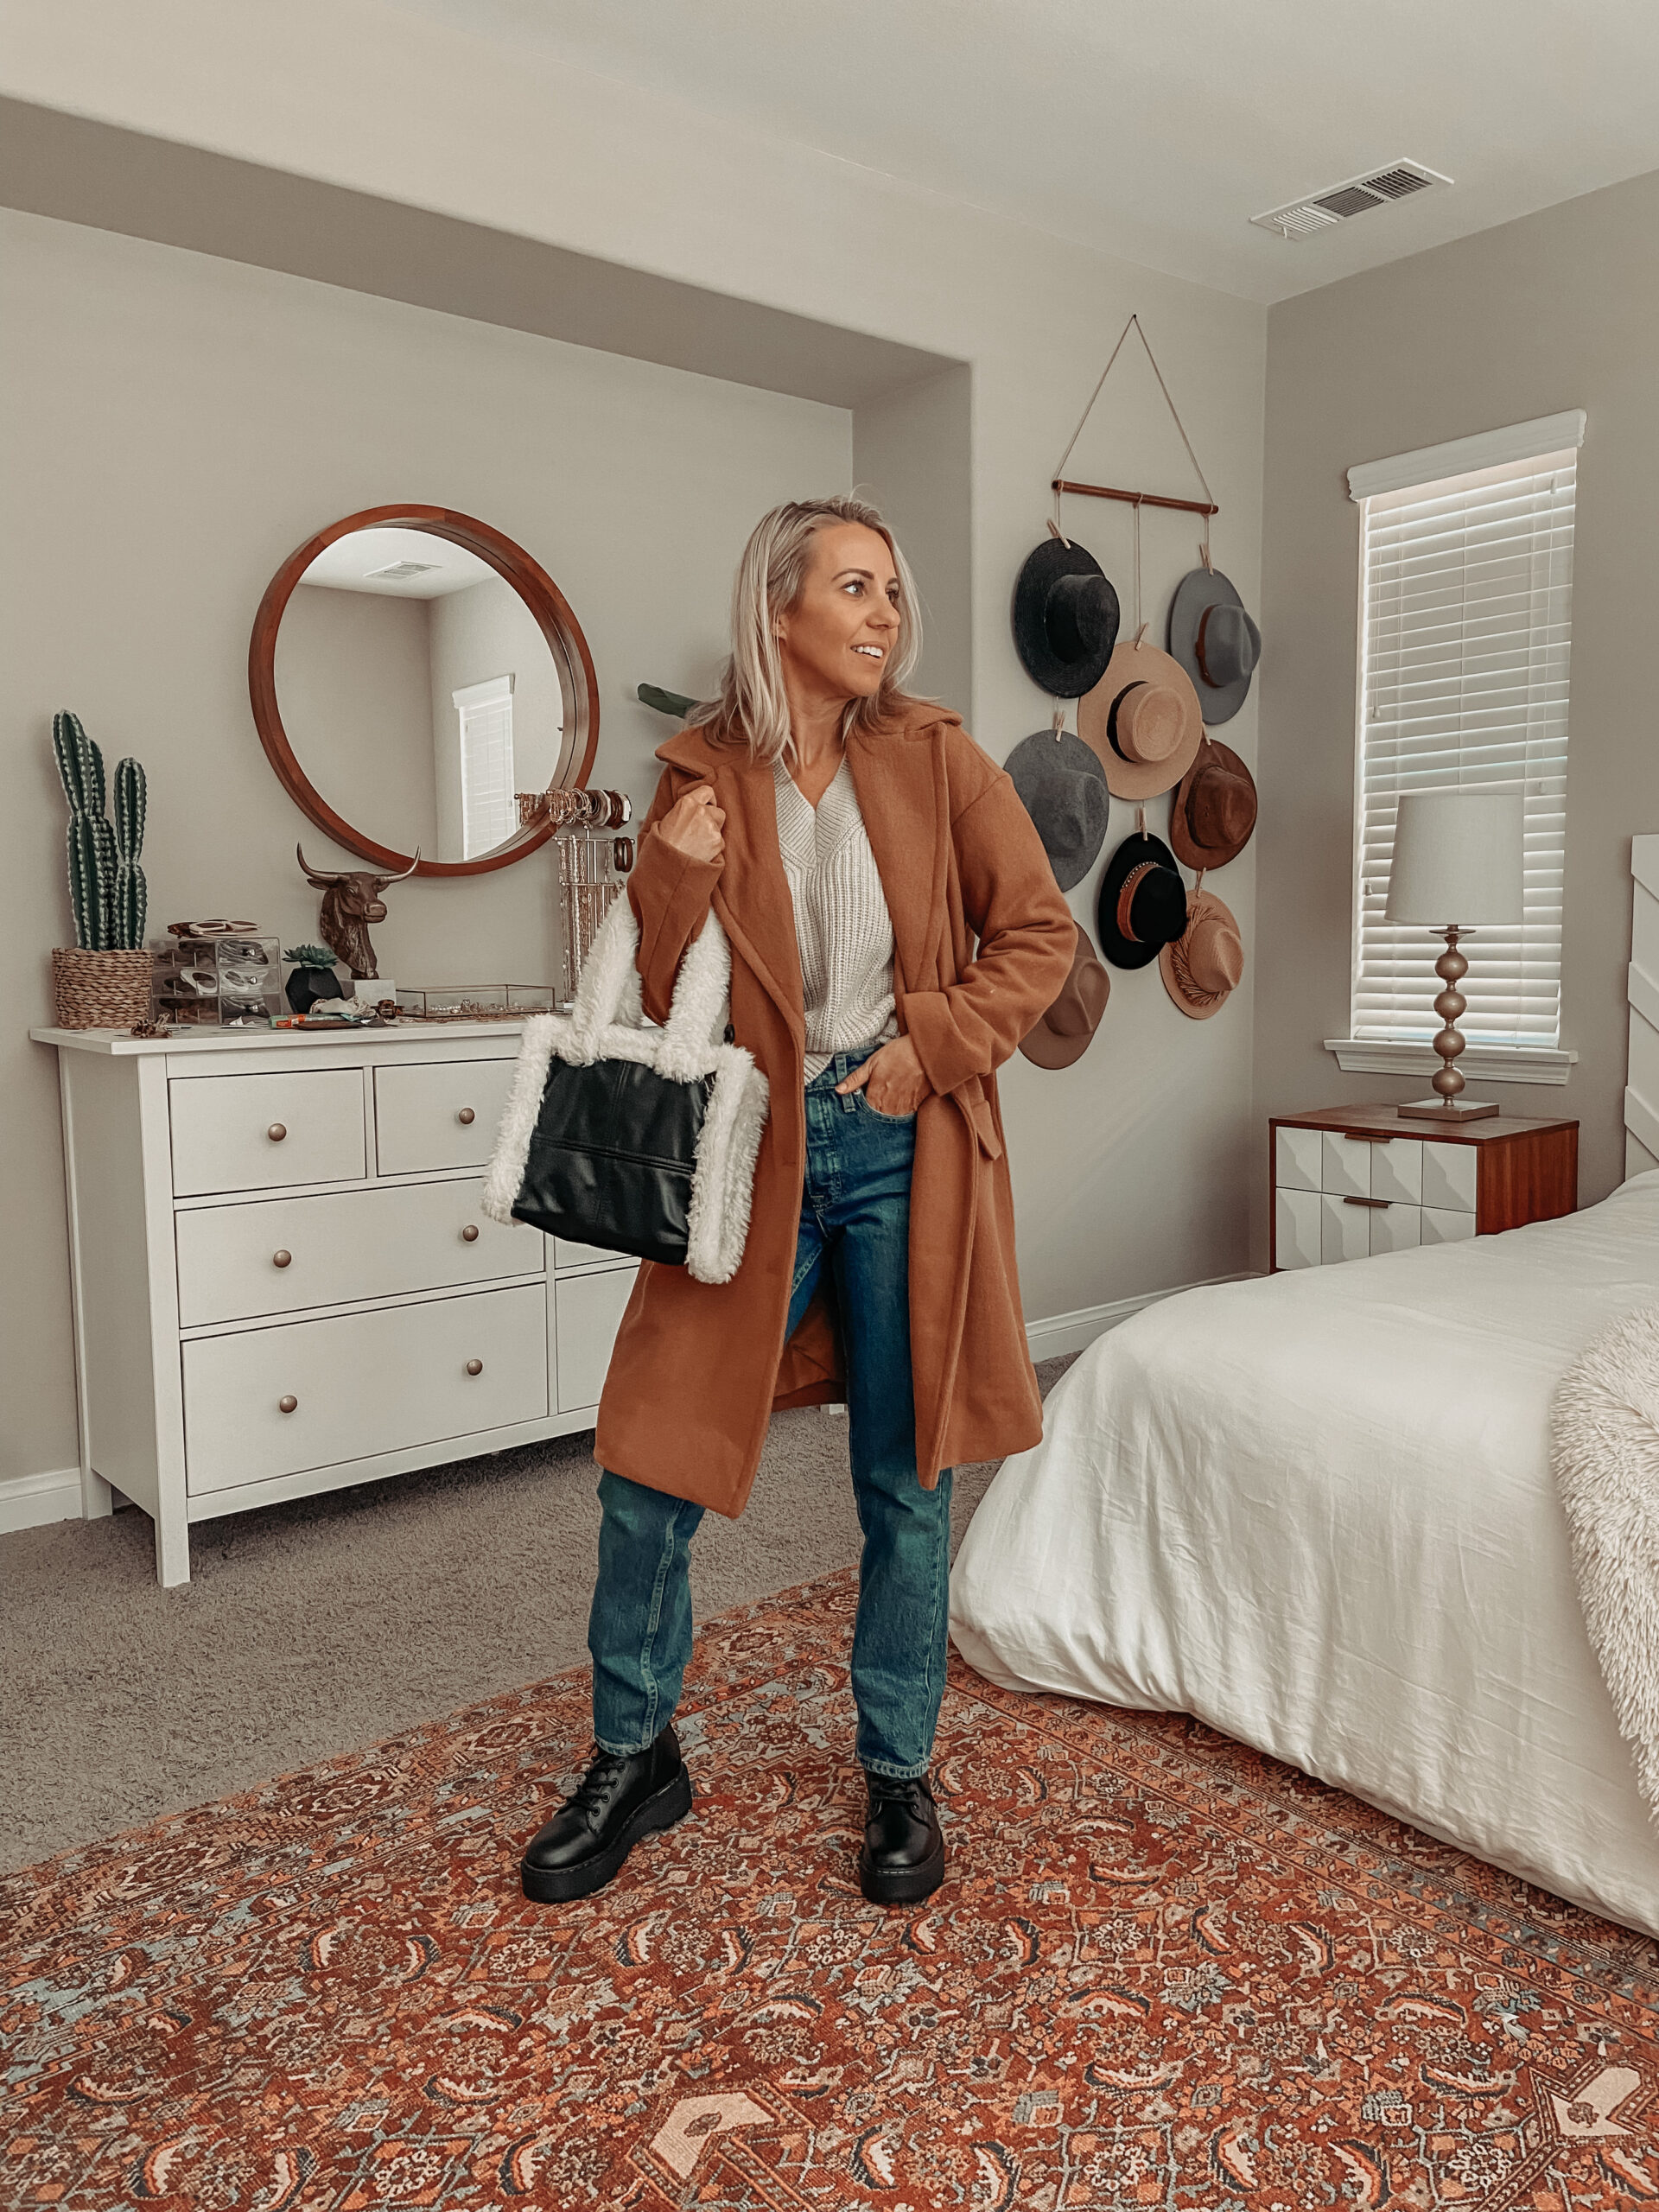 WALMART WINTER STYLE- Jaclyn De Leon Style+ sharing a few of my latest Walmart Fashion finds for the winter season. This coat is so chic and can be styled multiple ways